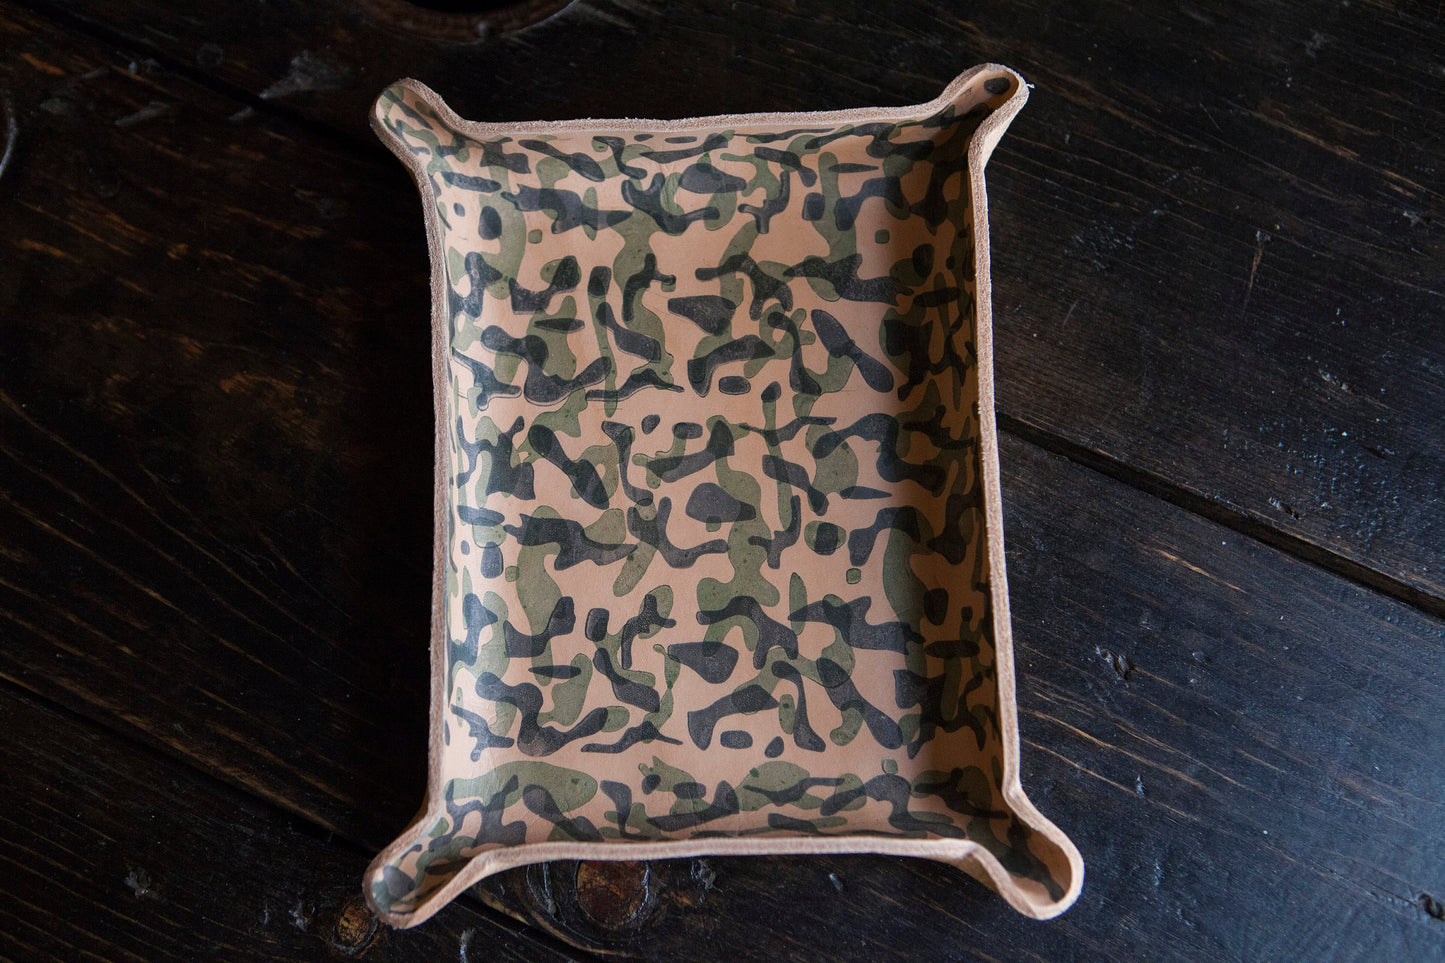 Wet Formed Natural Leather Catchall Tray with Hand Printed Camo Pattern